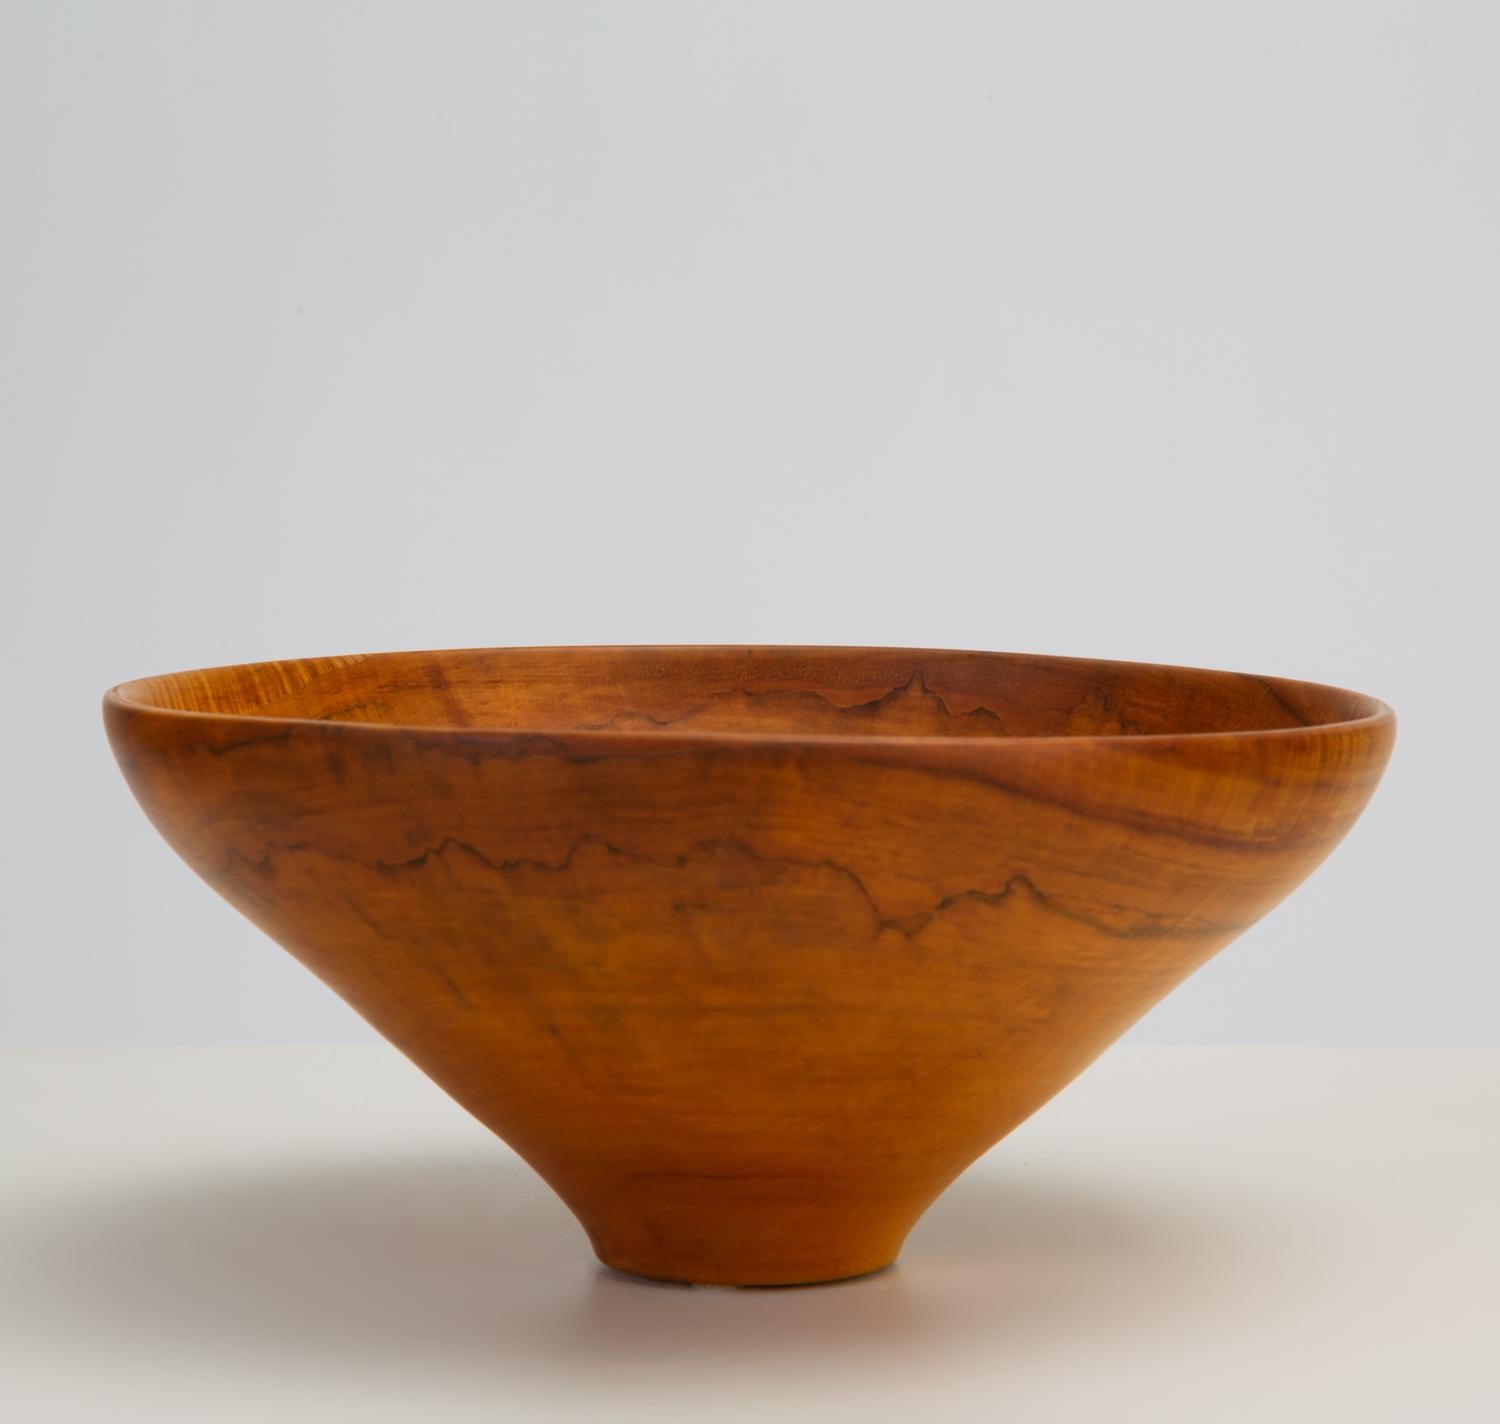 A California made turned wood bowl with a tapered foot and understated figuring in the maple wood. Signed on bottom 